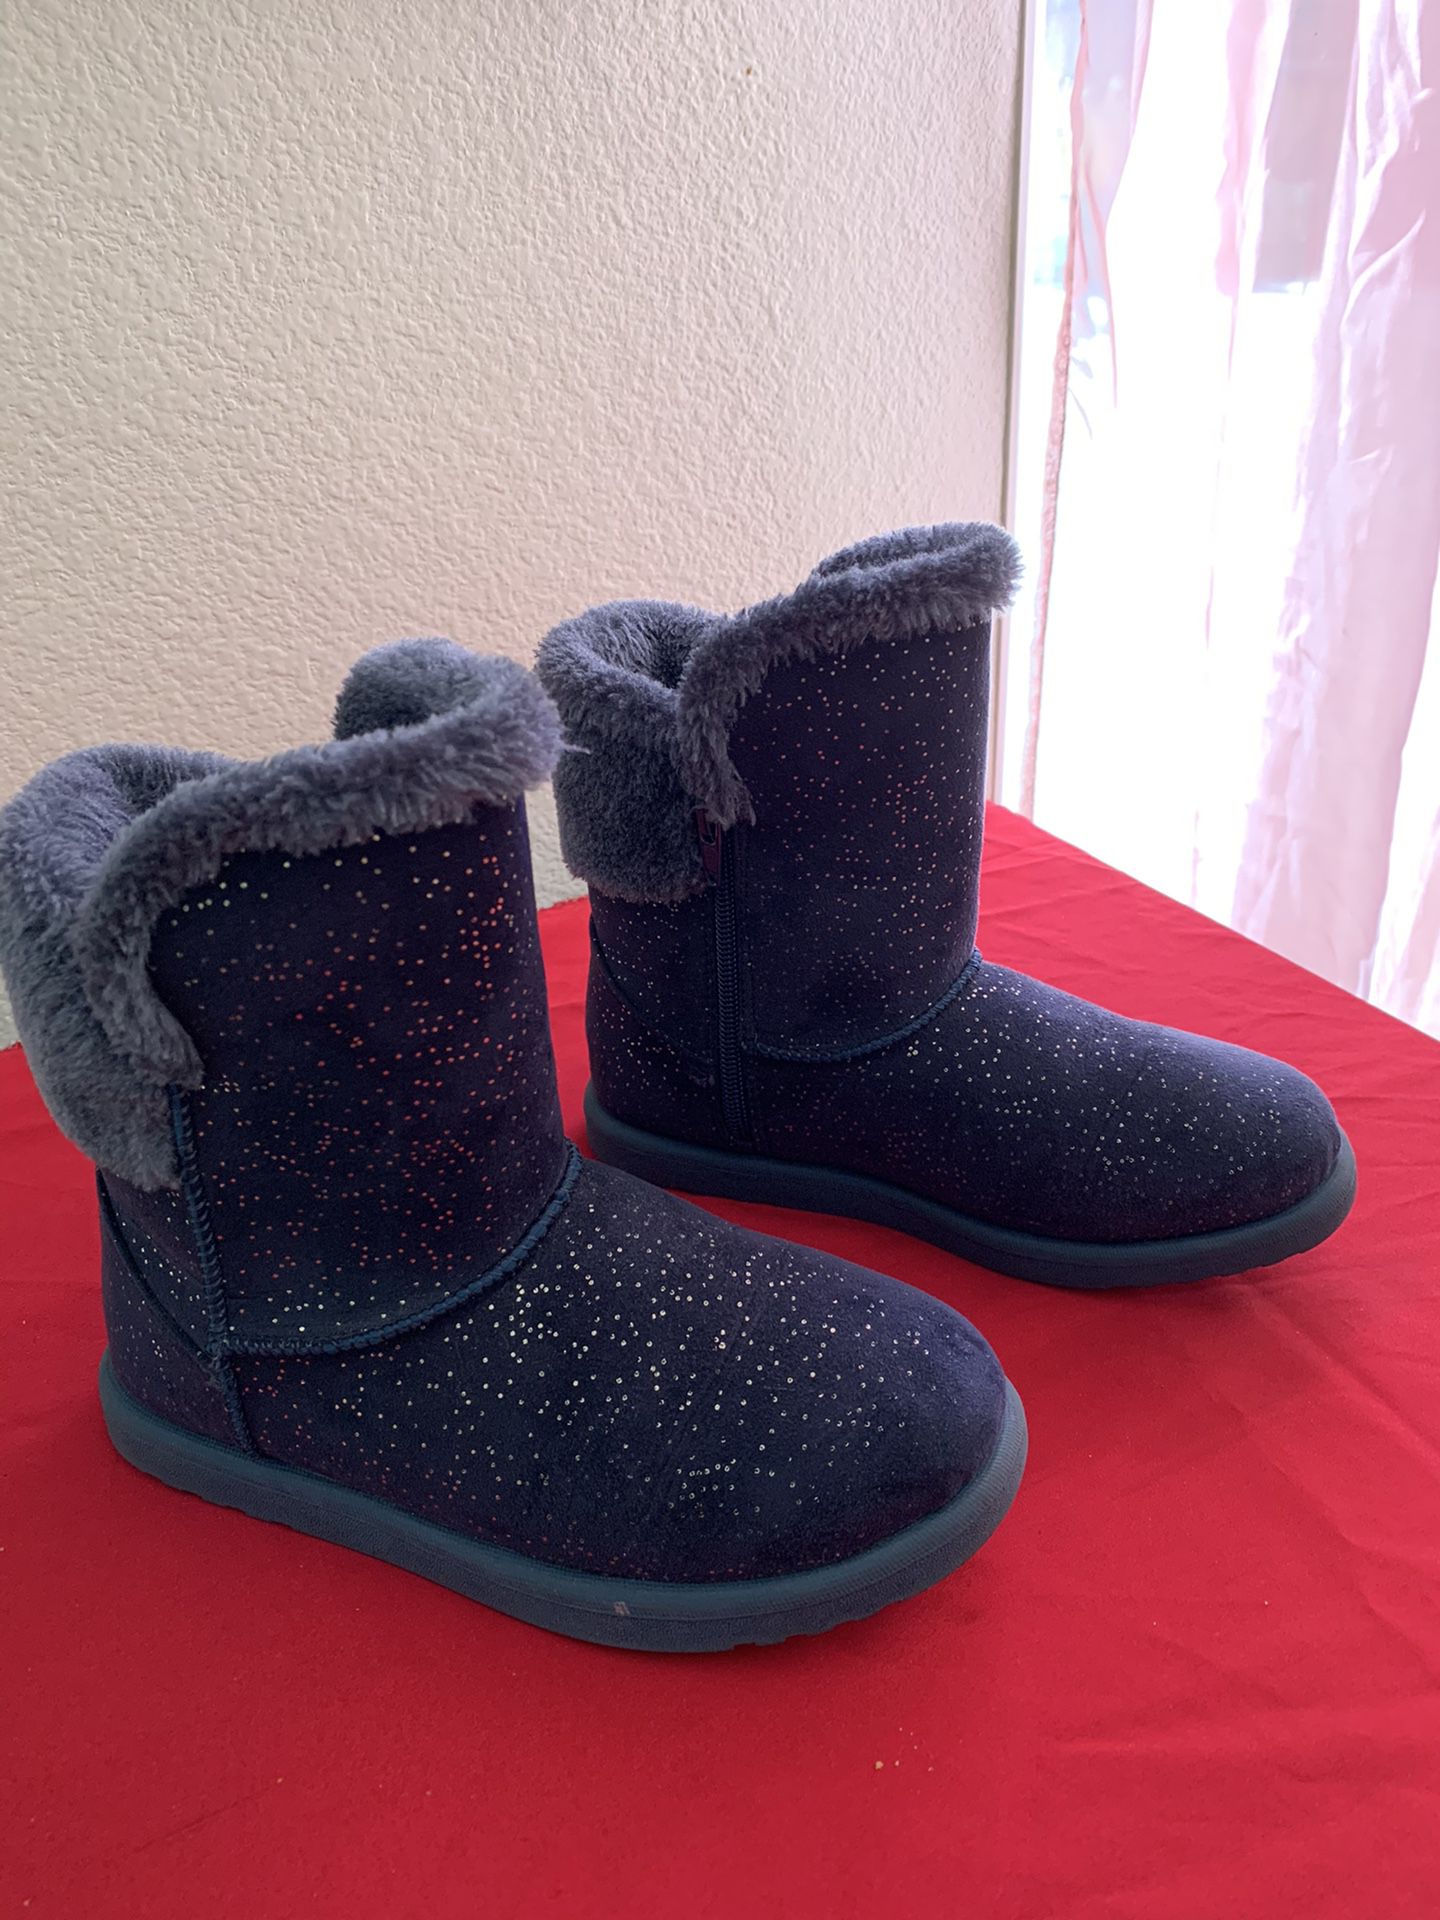 Litte girl cozy boots size 2